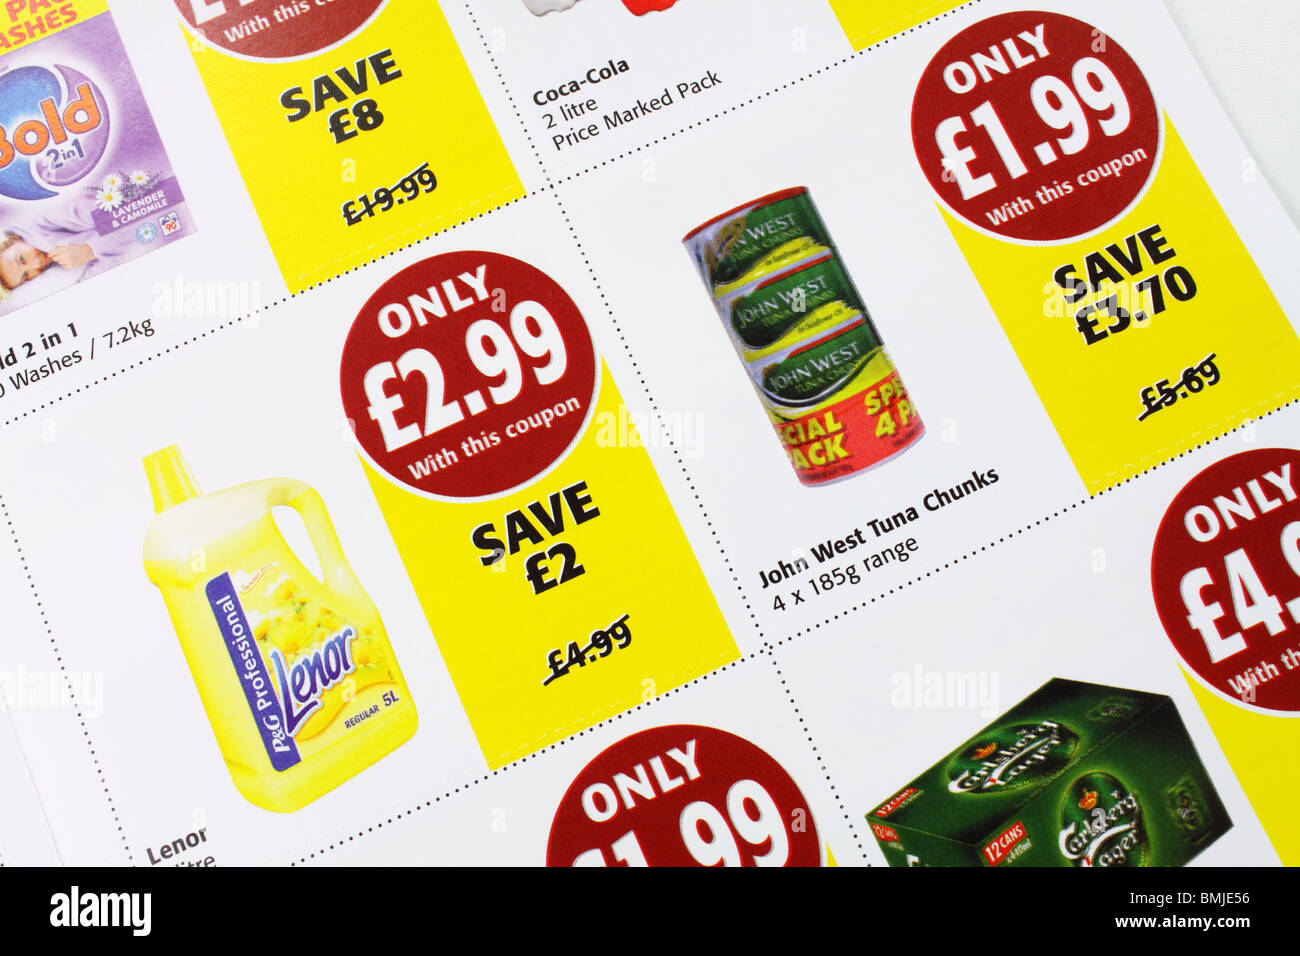 money off coupons / vouchers from supermarket chain Stock Photo Alamy